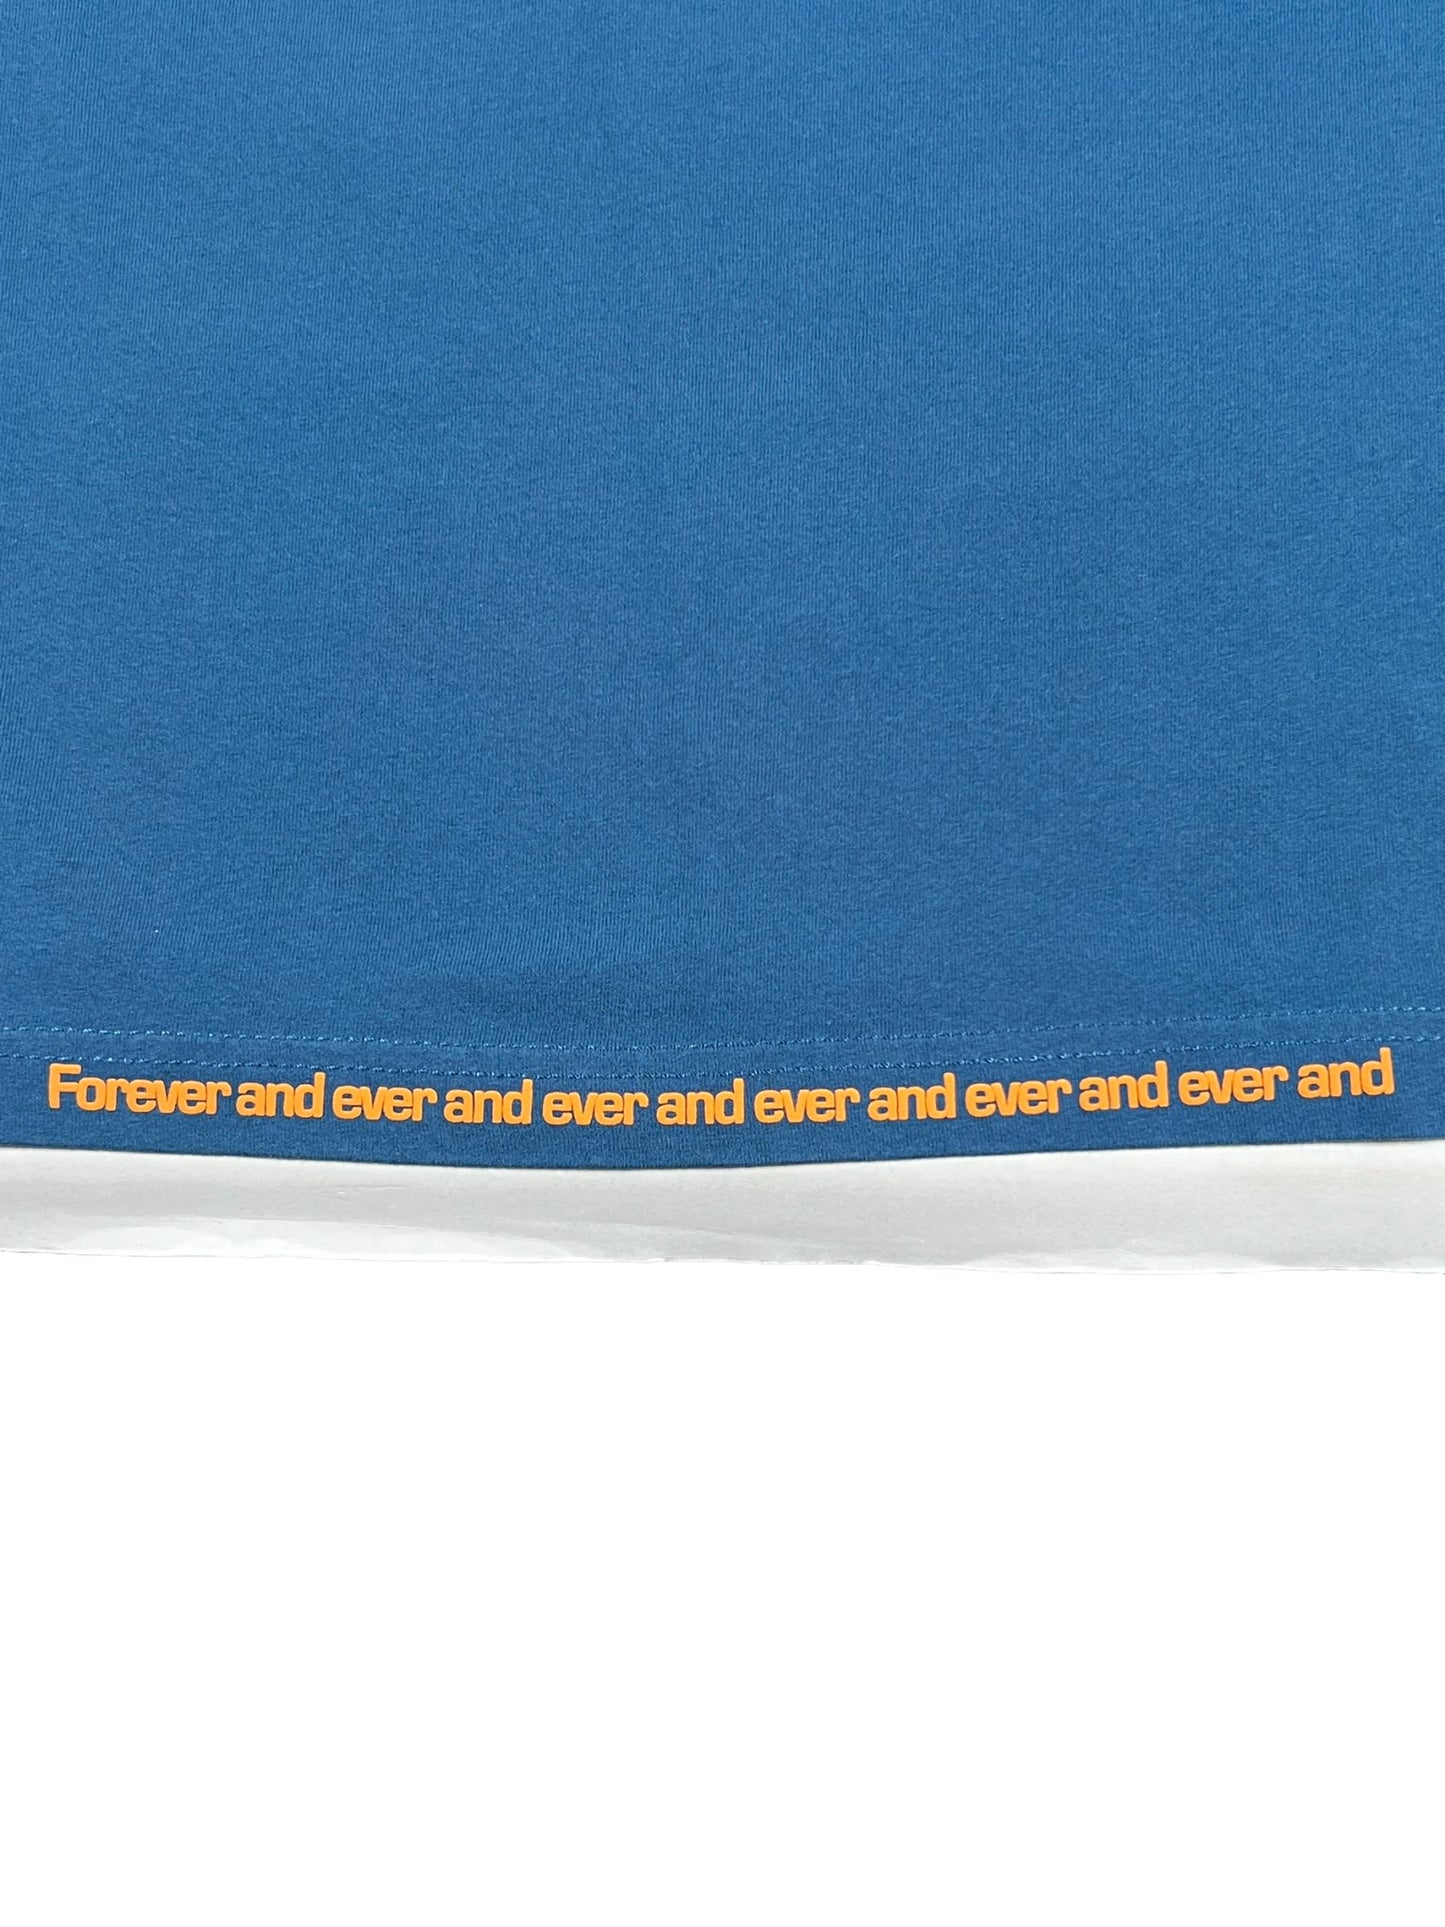 DIESEL T-RUST T-SHIRT TEAL 100% Cotton textile with the phrase "forever and ever and ever and ever and ever and ever" repeated in yellow lettering along the edge.